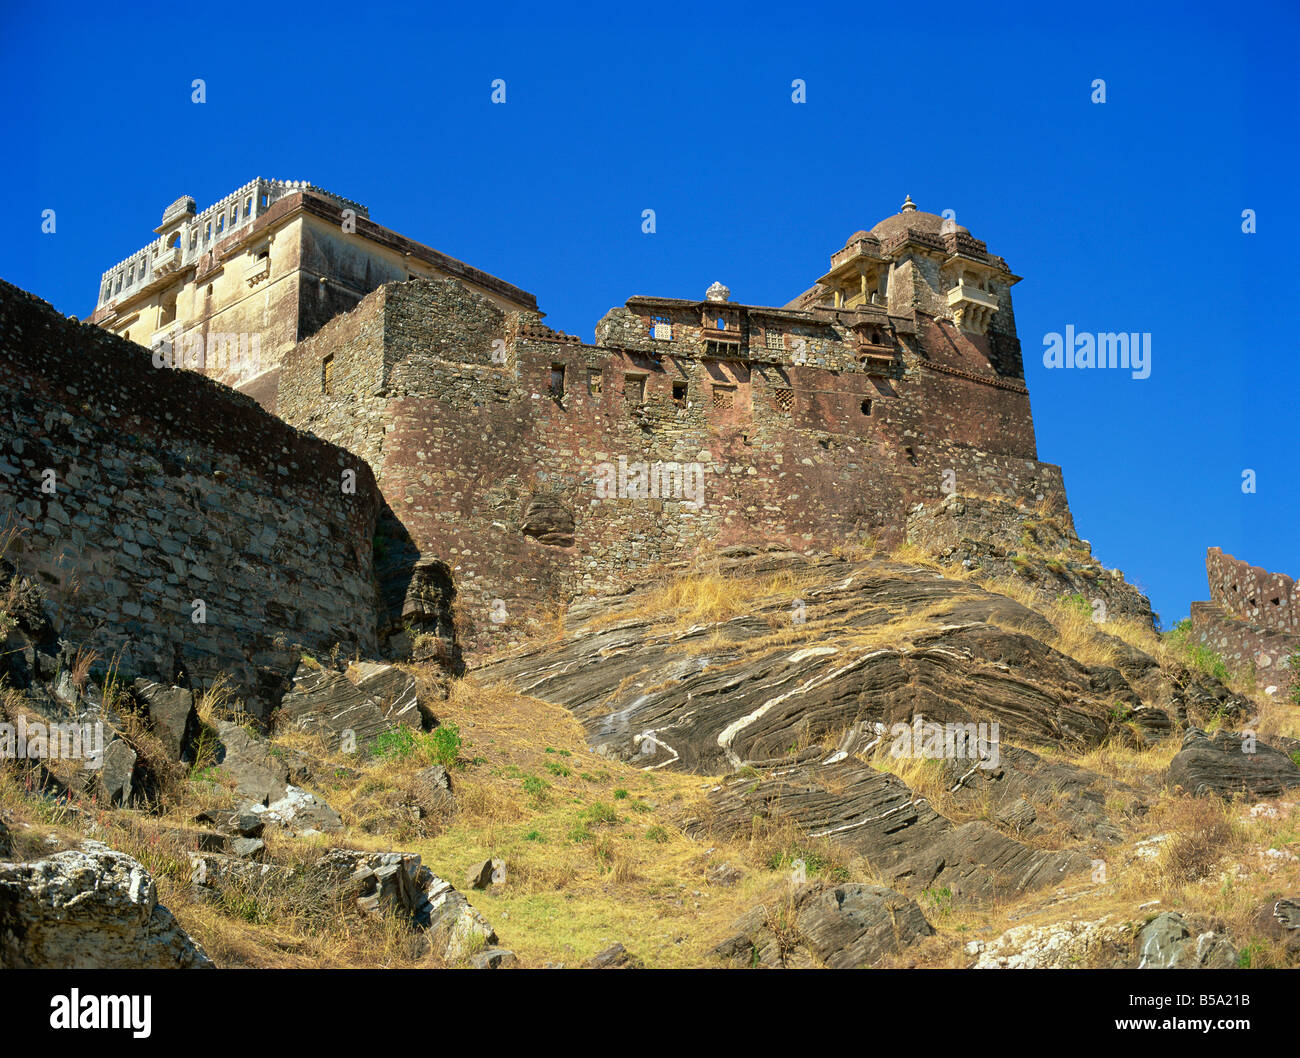 Badal Mahal Cloud Palace on peak of a rocky outcrop Kumbalgarh Fort Rajasthan state India Asia Stock Photo